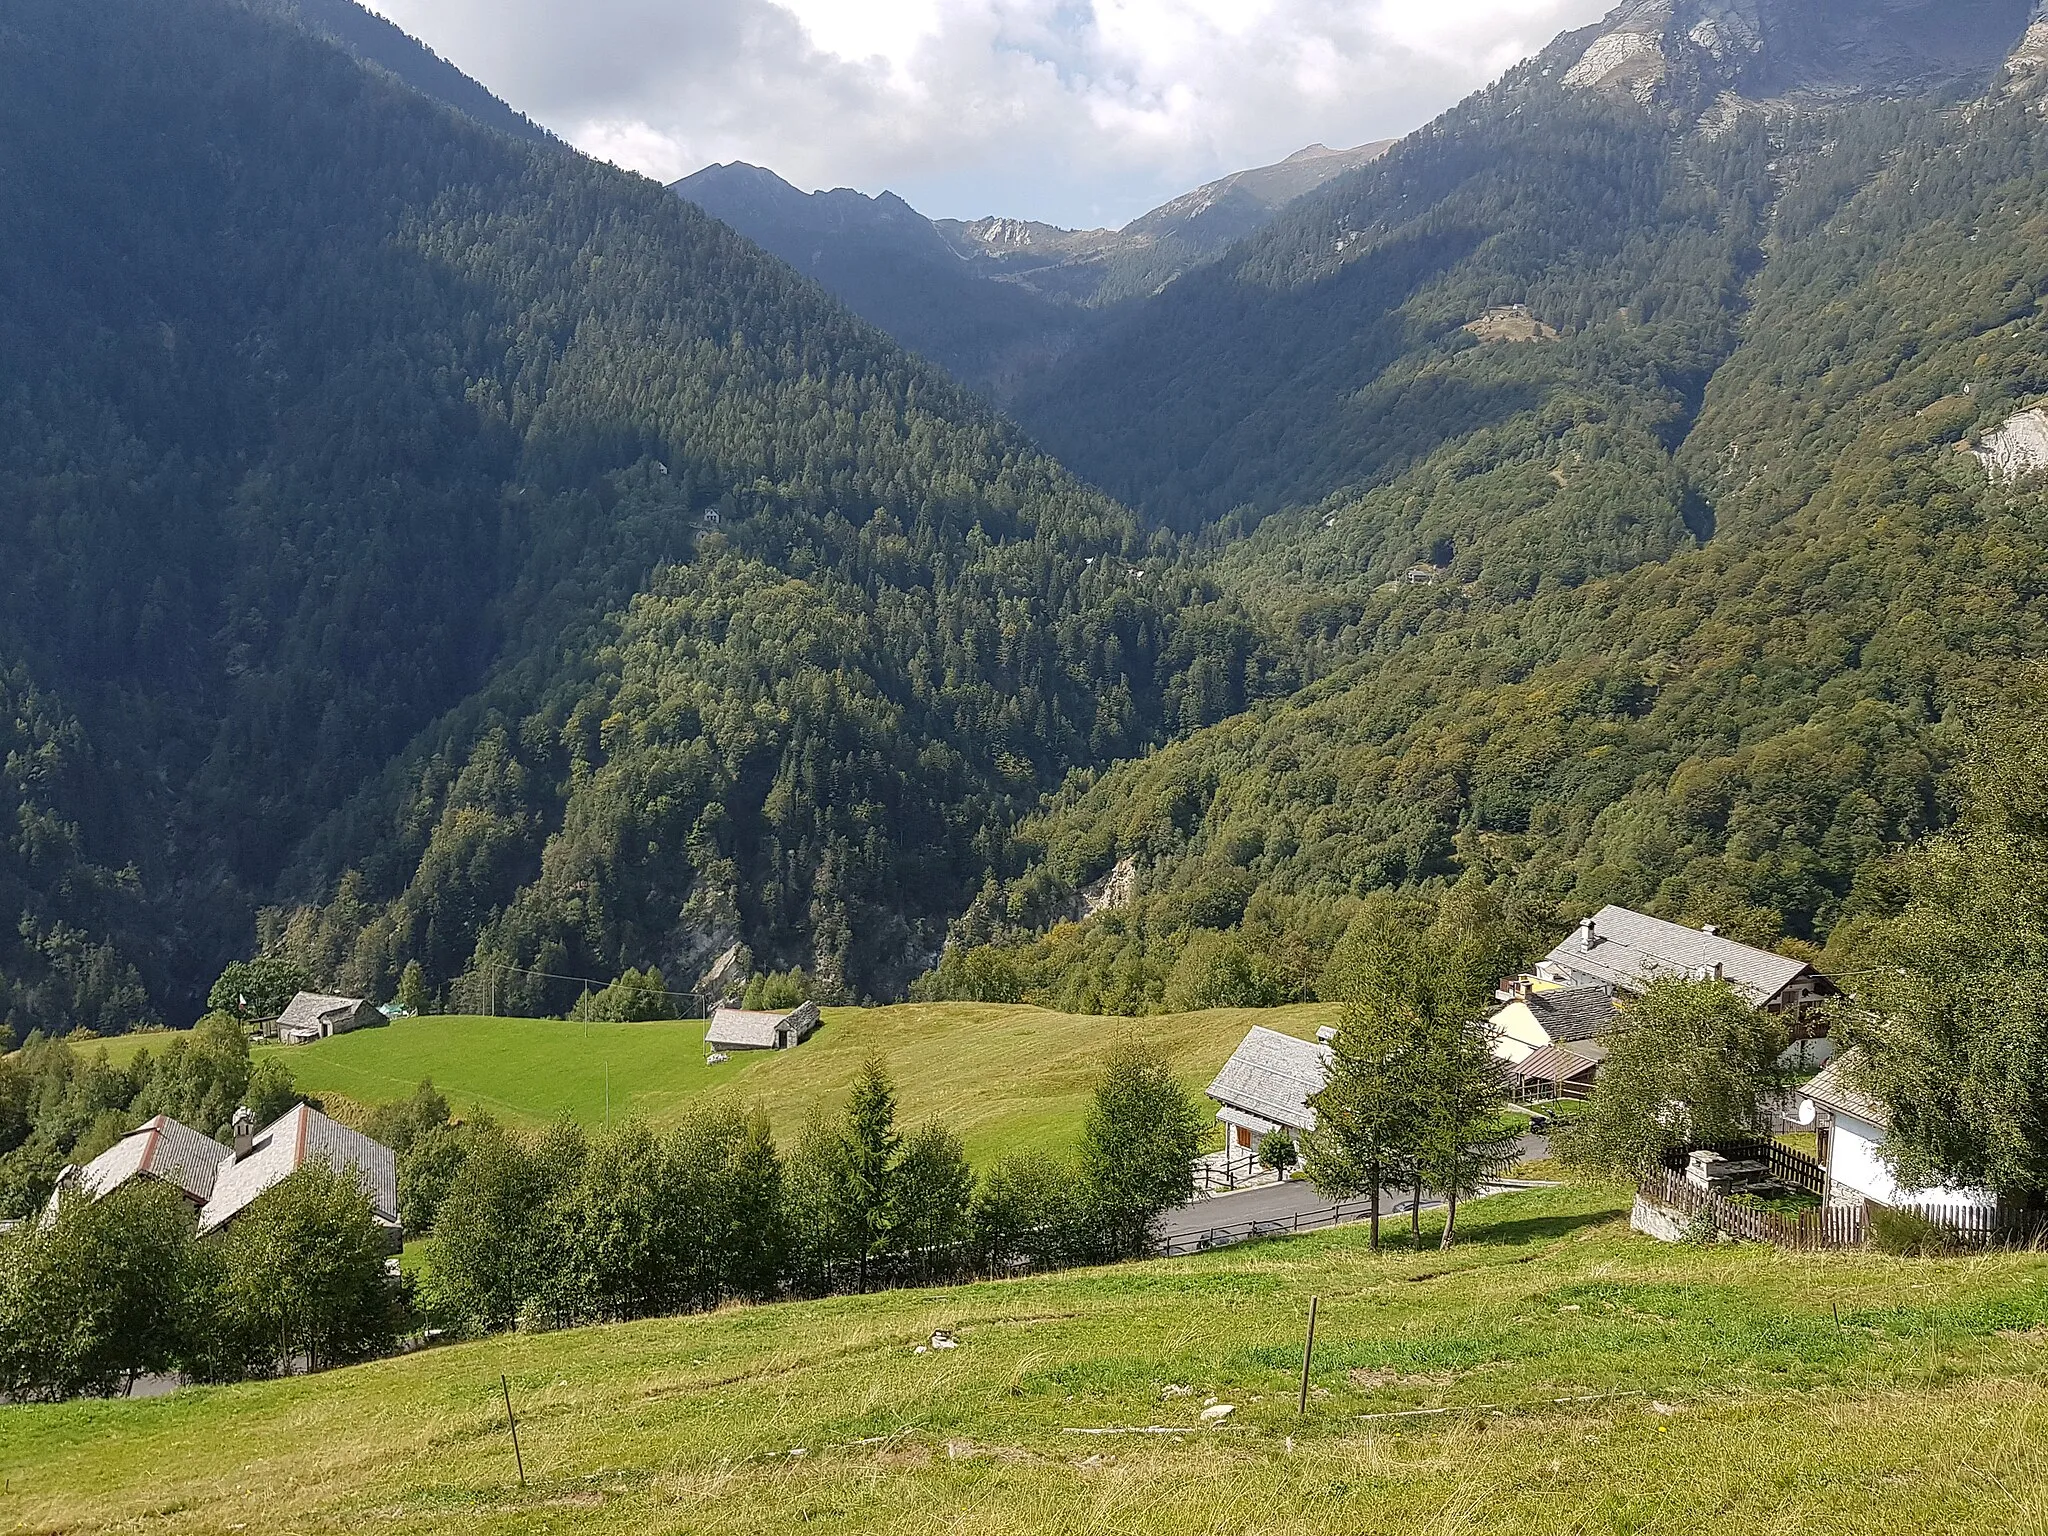 Photo showing: The small village of Arvogno, part of the municipality of Toceno in the Vigezzo Valley. Toceno is located in the province Verbanio-Cusio-Ossola (VCO or VB) in region Piedmont in northen Italy. Picture taken on the 12th of september 2020. 2020-09-12